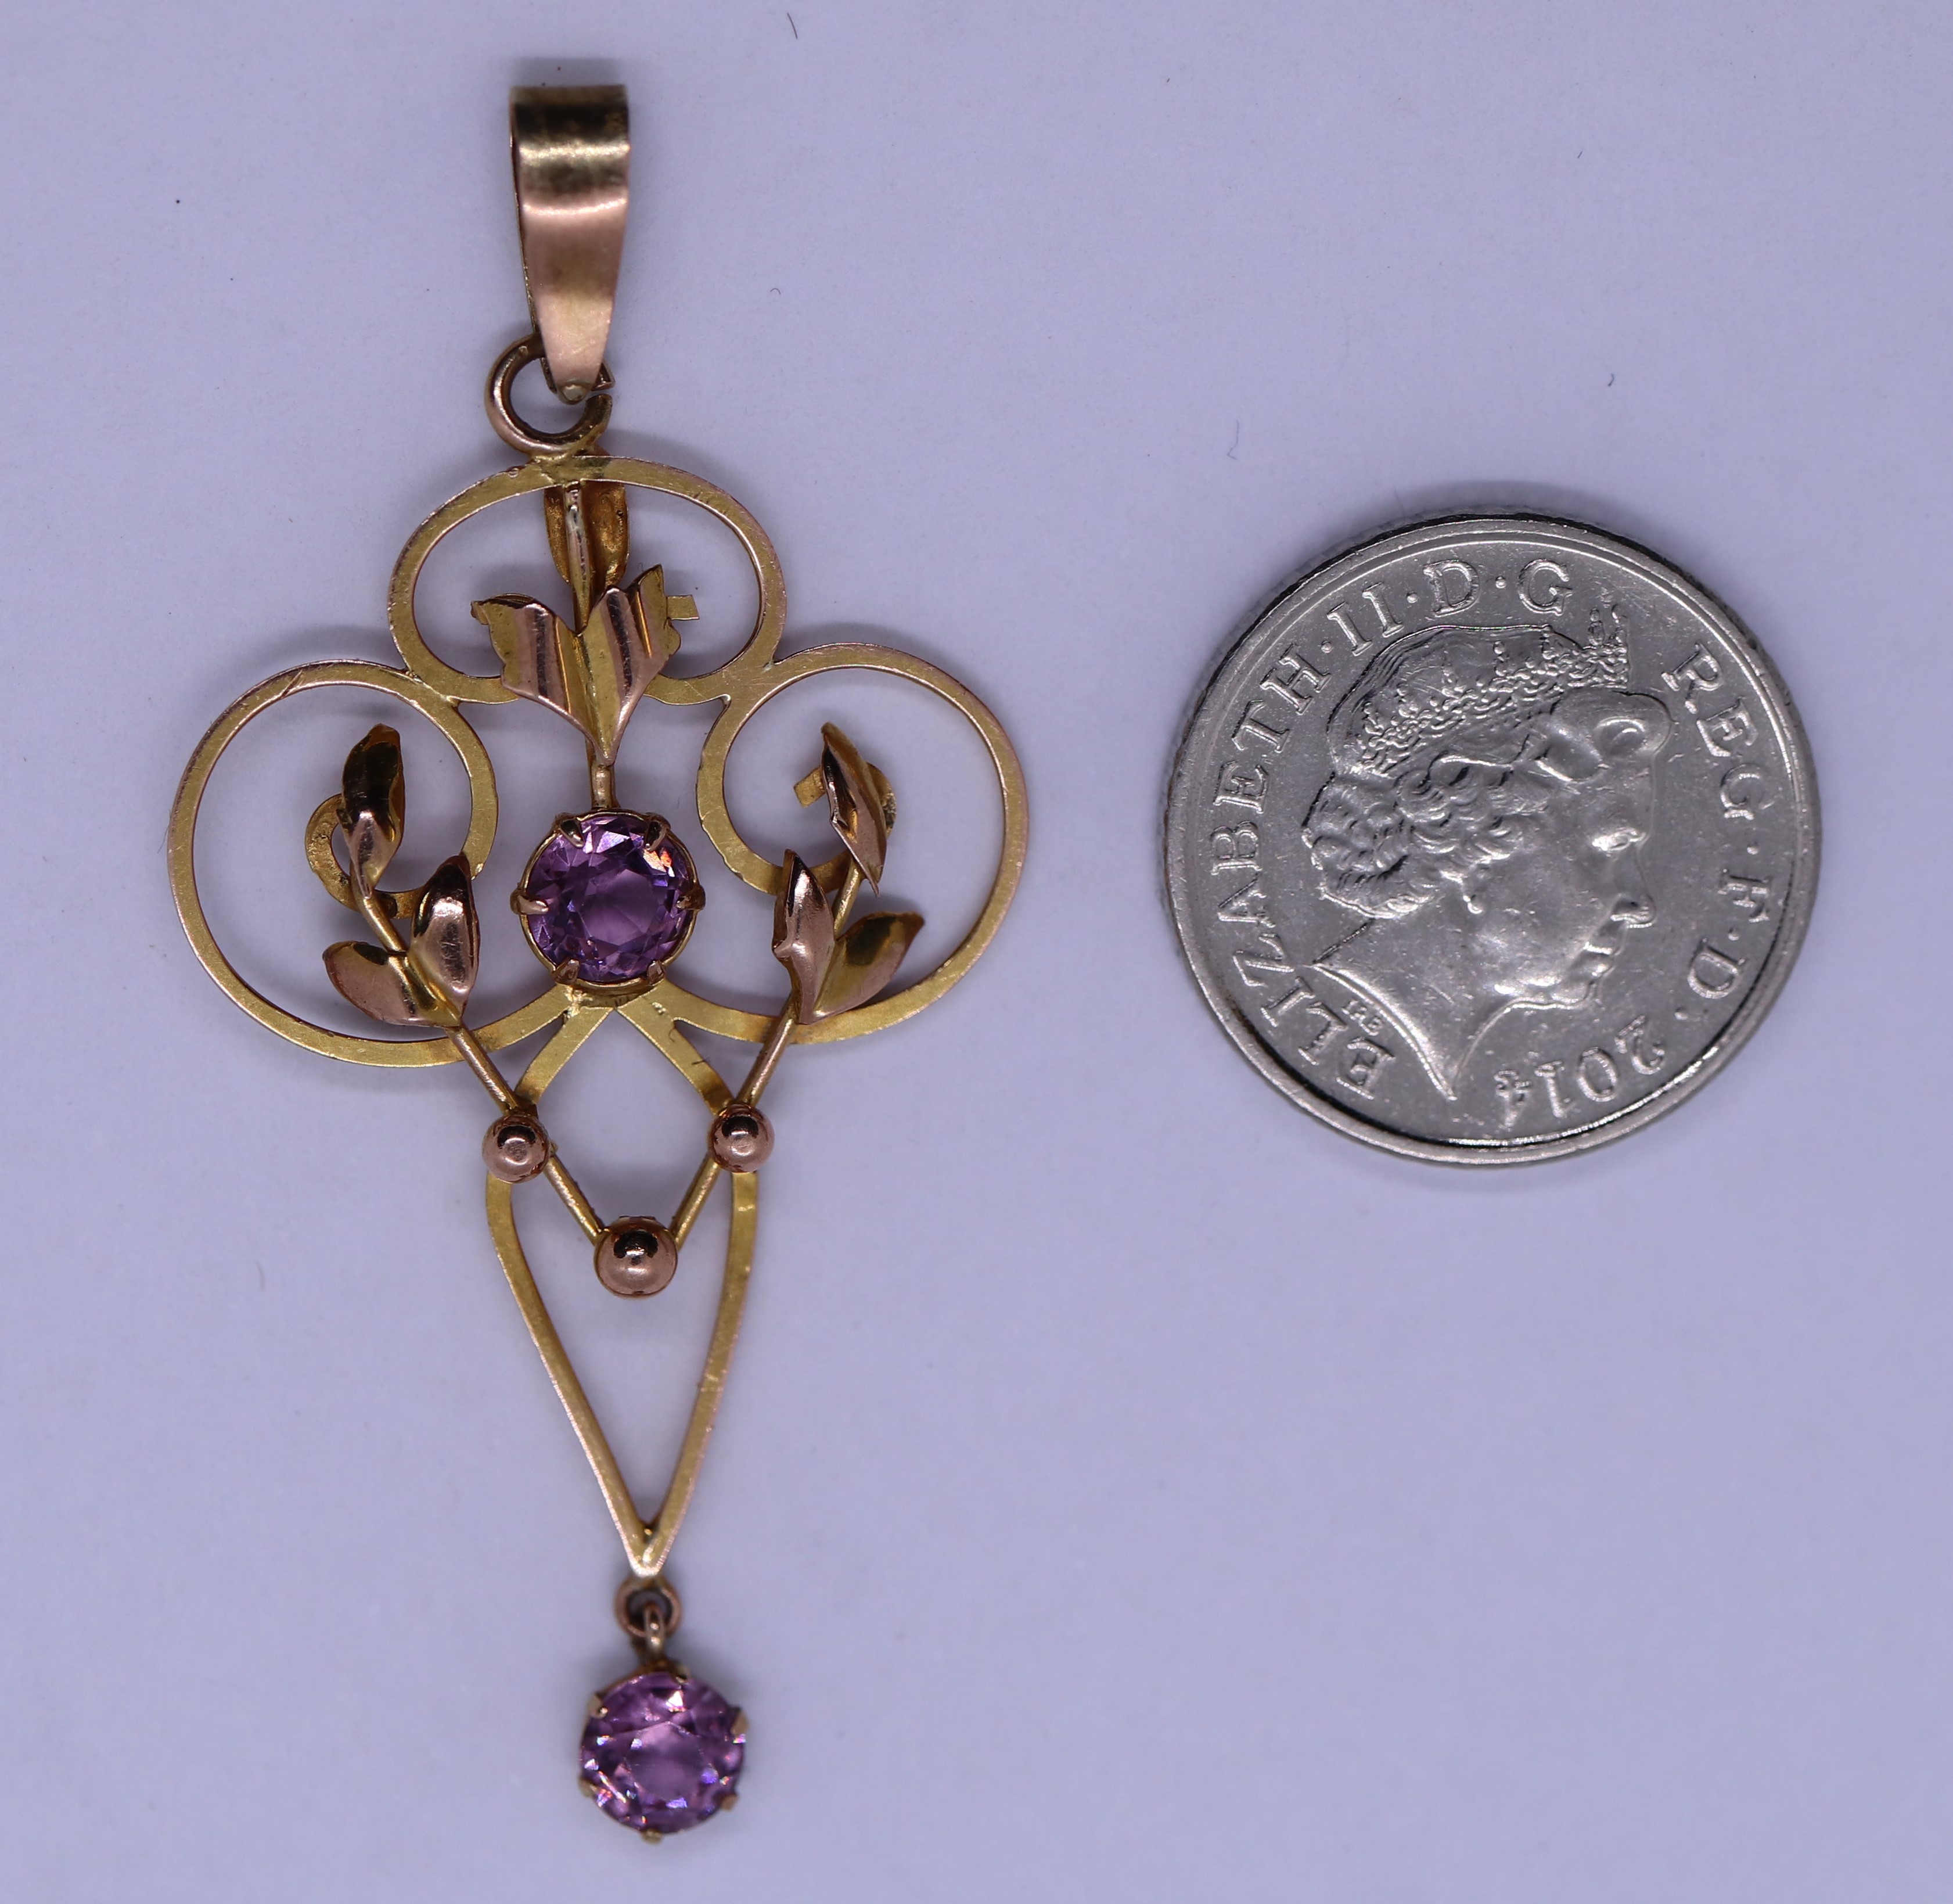 Antique 9ct gold and amethyst pendant - Image 2 of 2